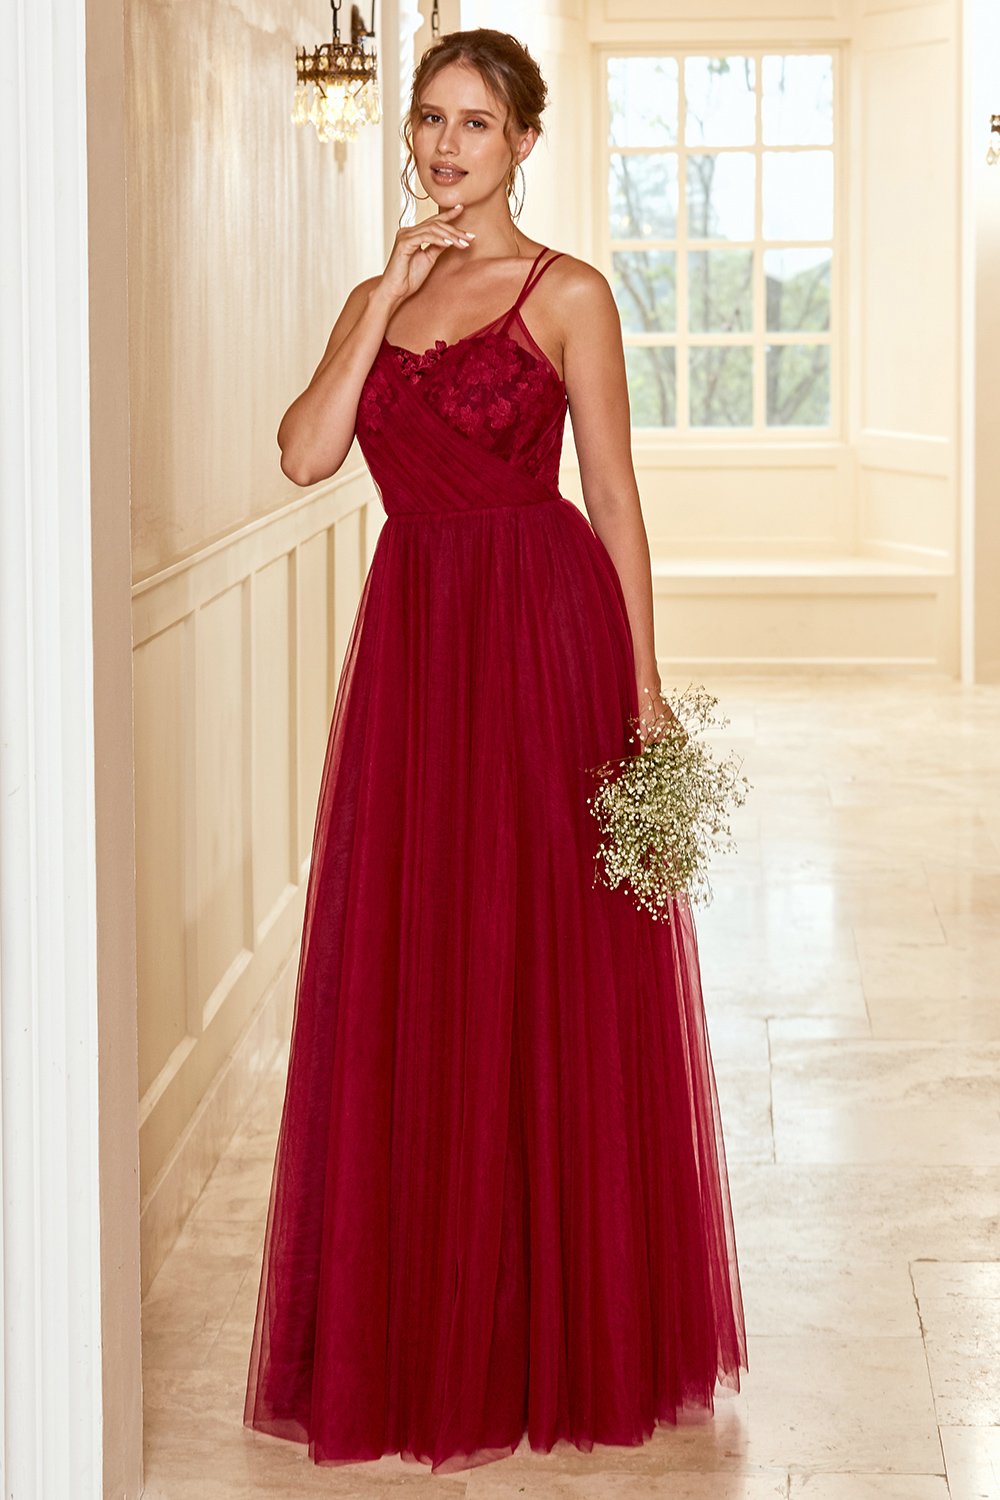 Burgundy Long Bridesmaid Dress with Lace